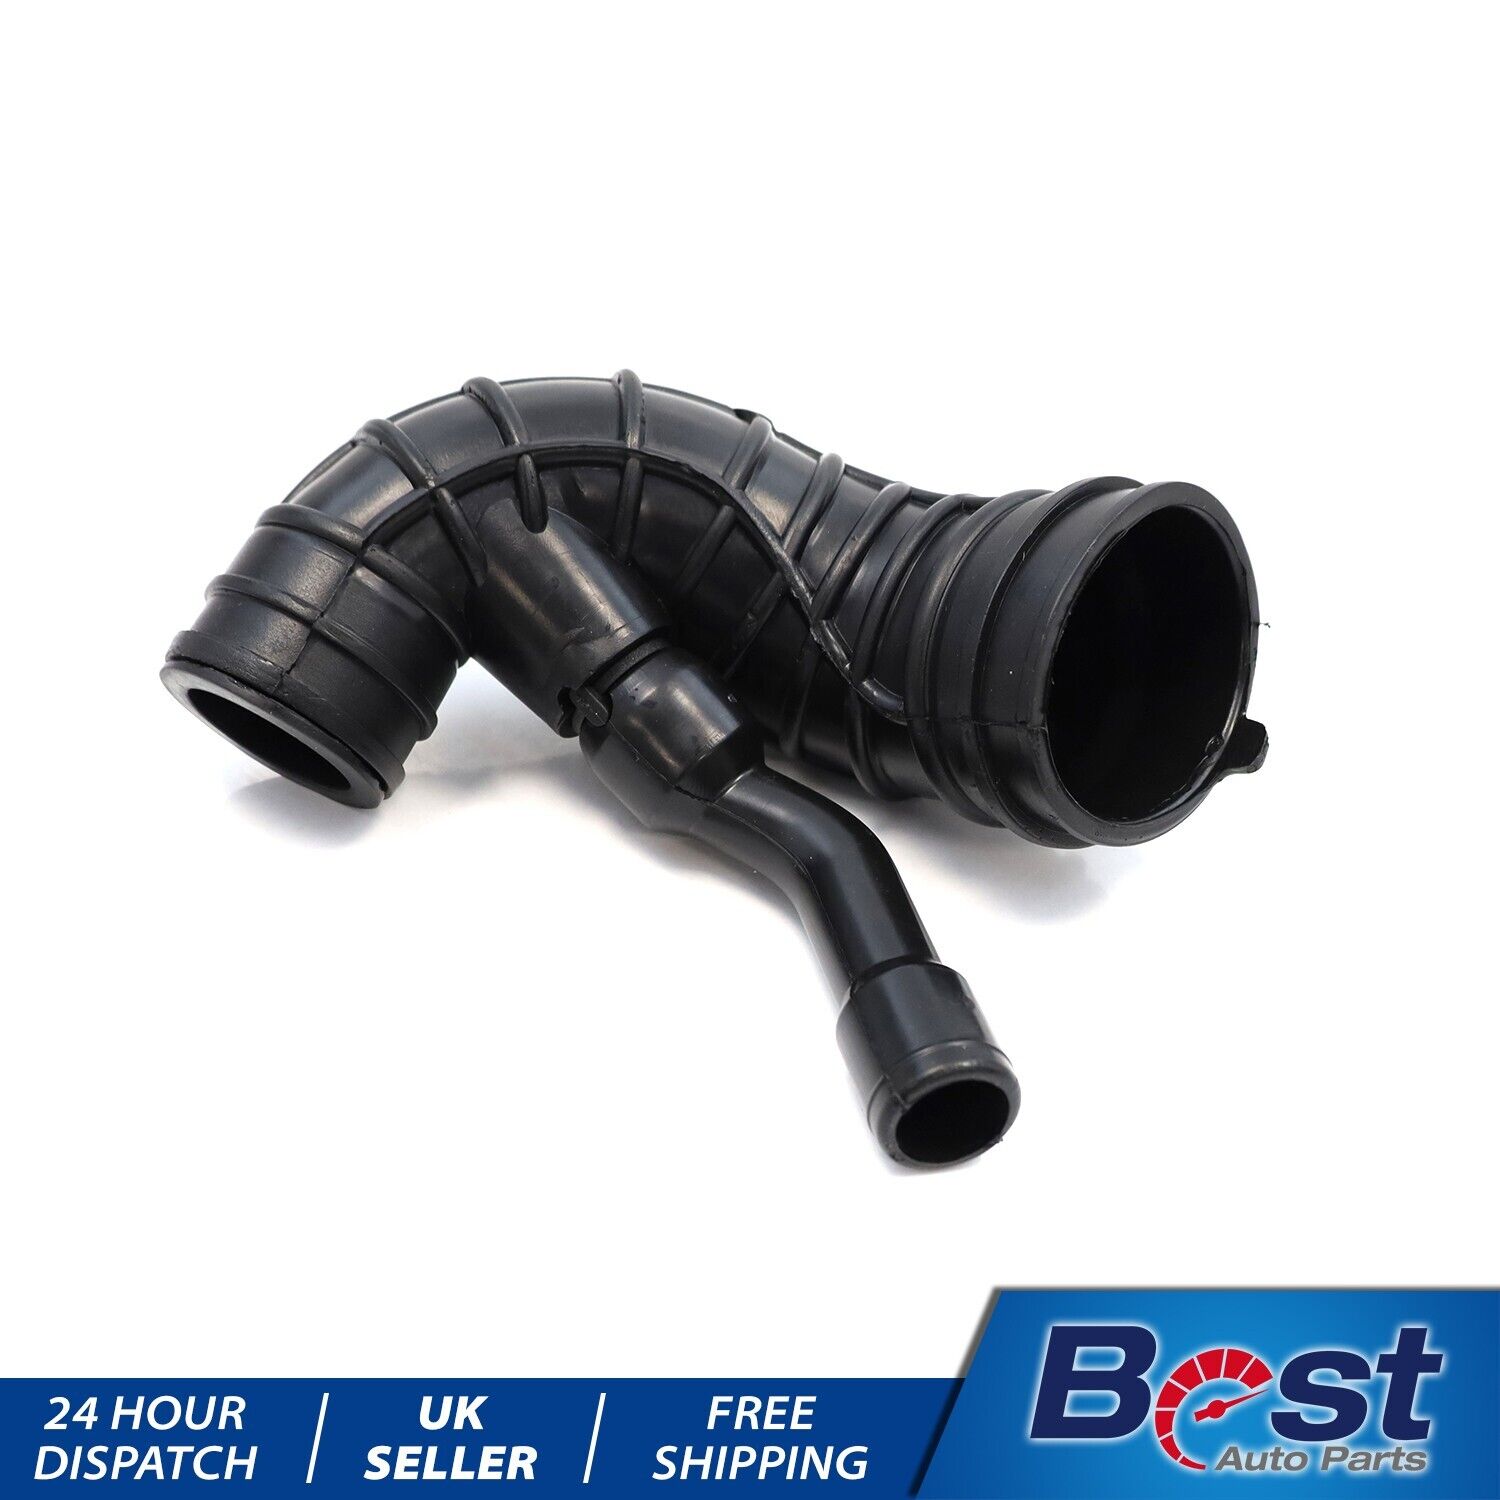 FOR PEUGEOT 107 206 207 307 BIPPER FORD FUSION AIR INTAKE HOSE PIPE 1434.13